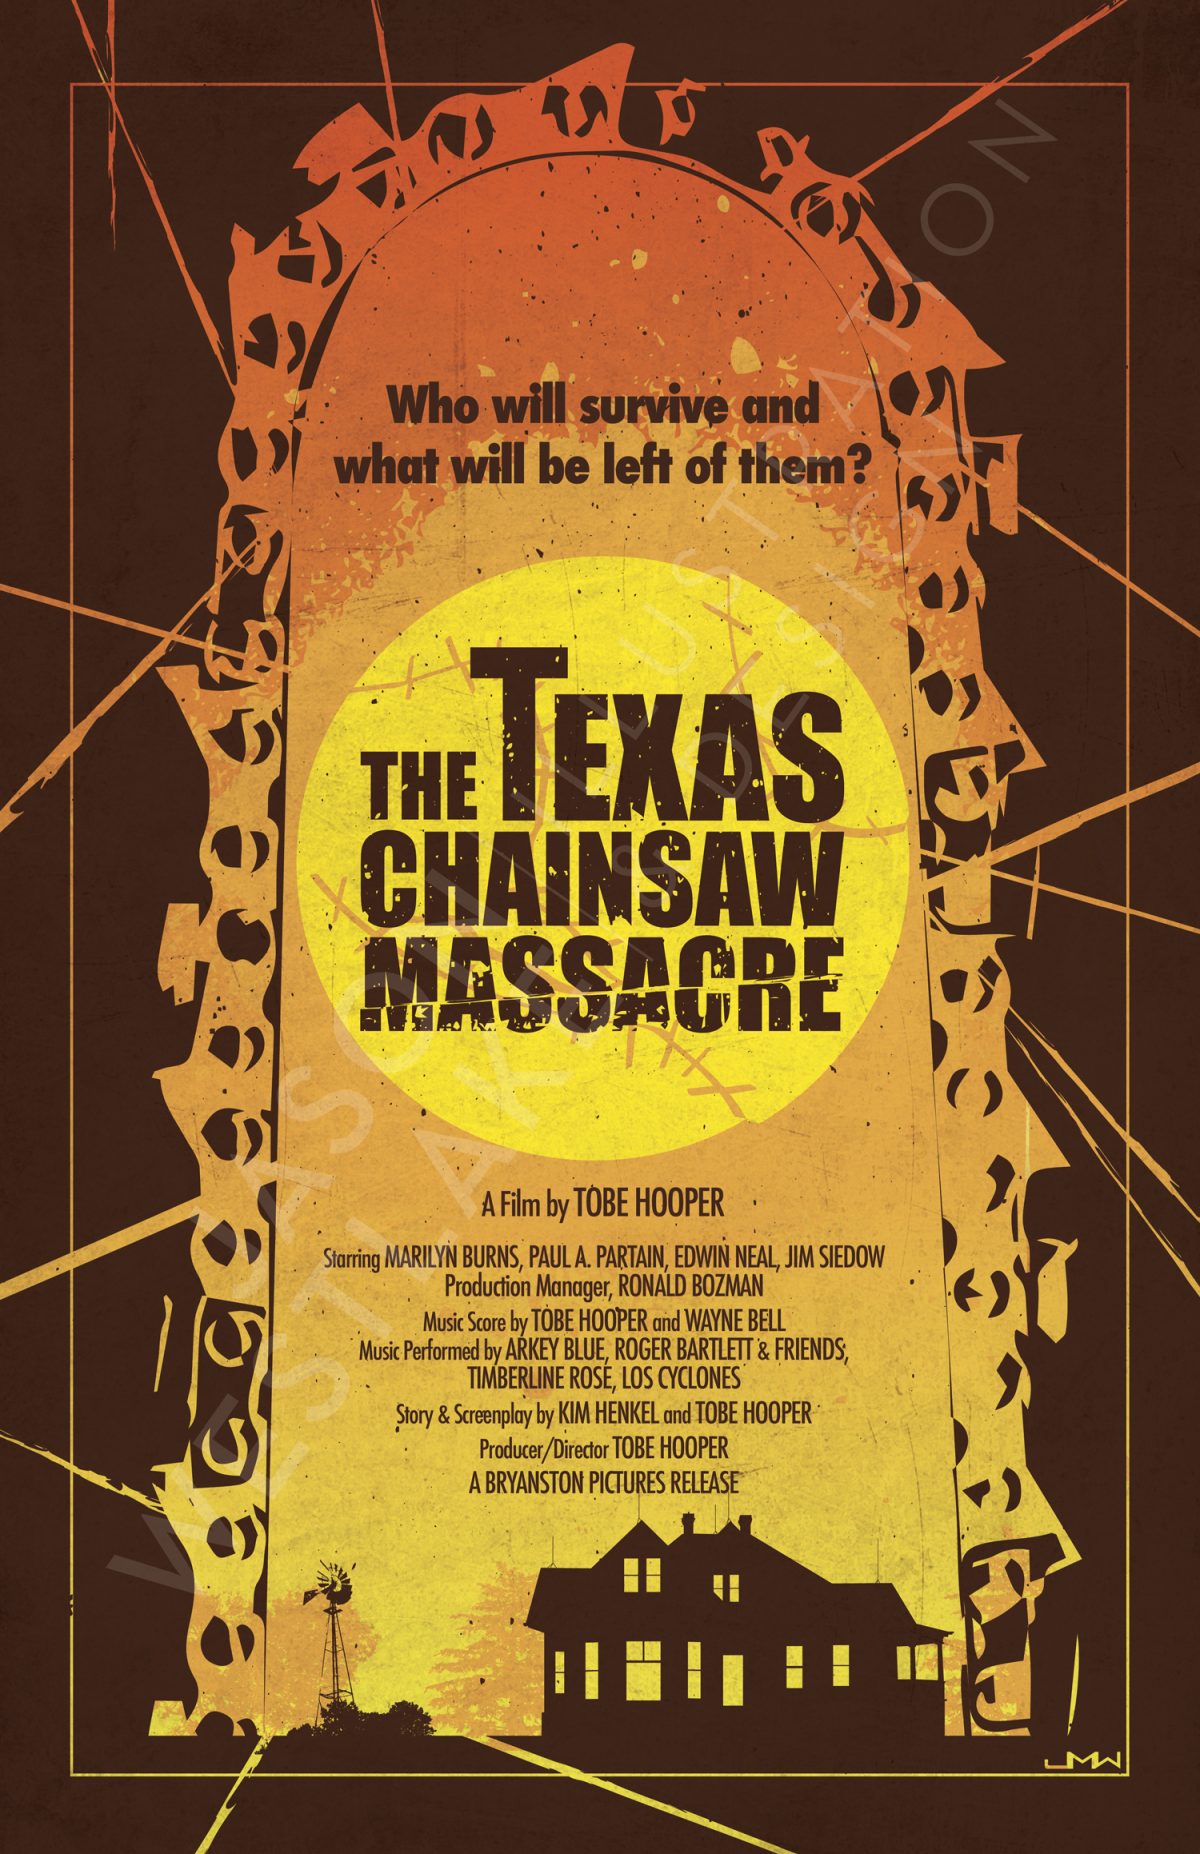 The Texas Chainsaw Massacre - PosterSpy